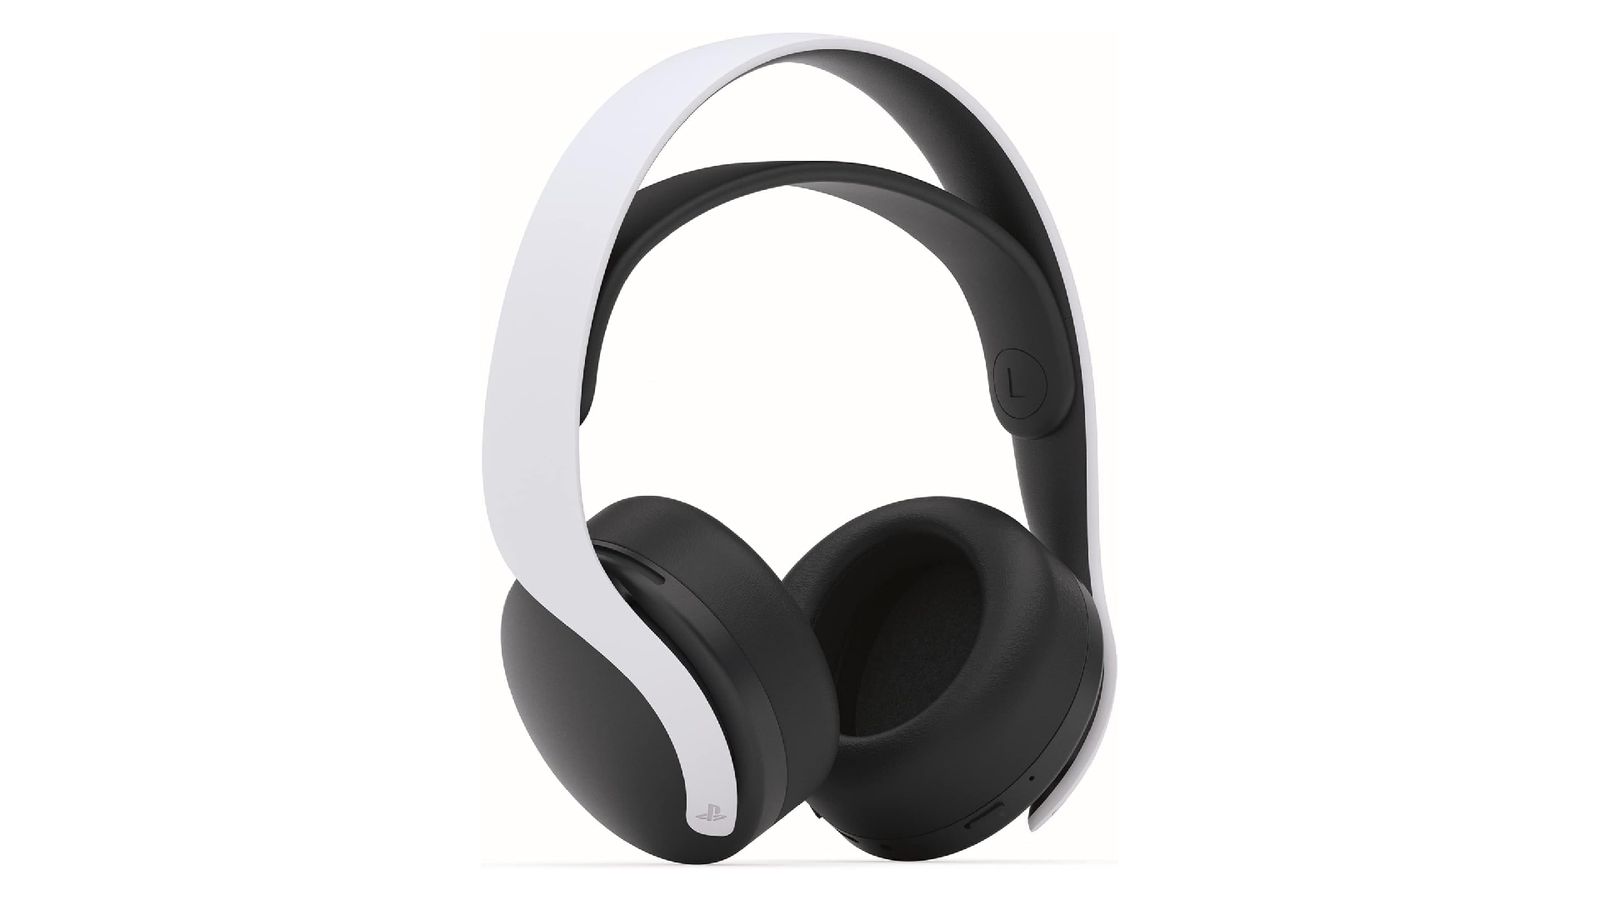 PlayStation 5 Pulse 3D product image of a white and black over-ear wireless headset.